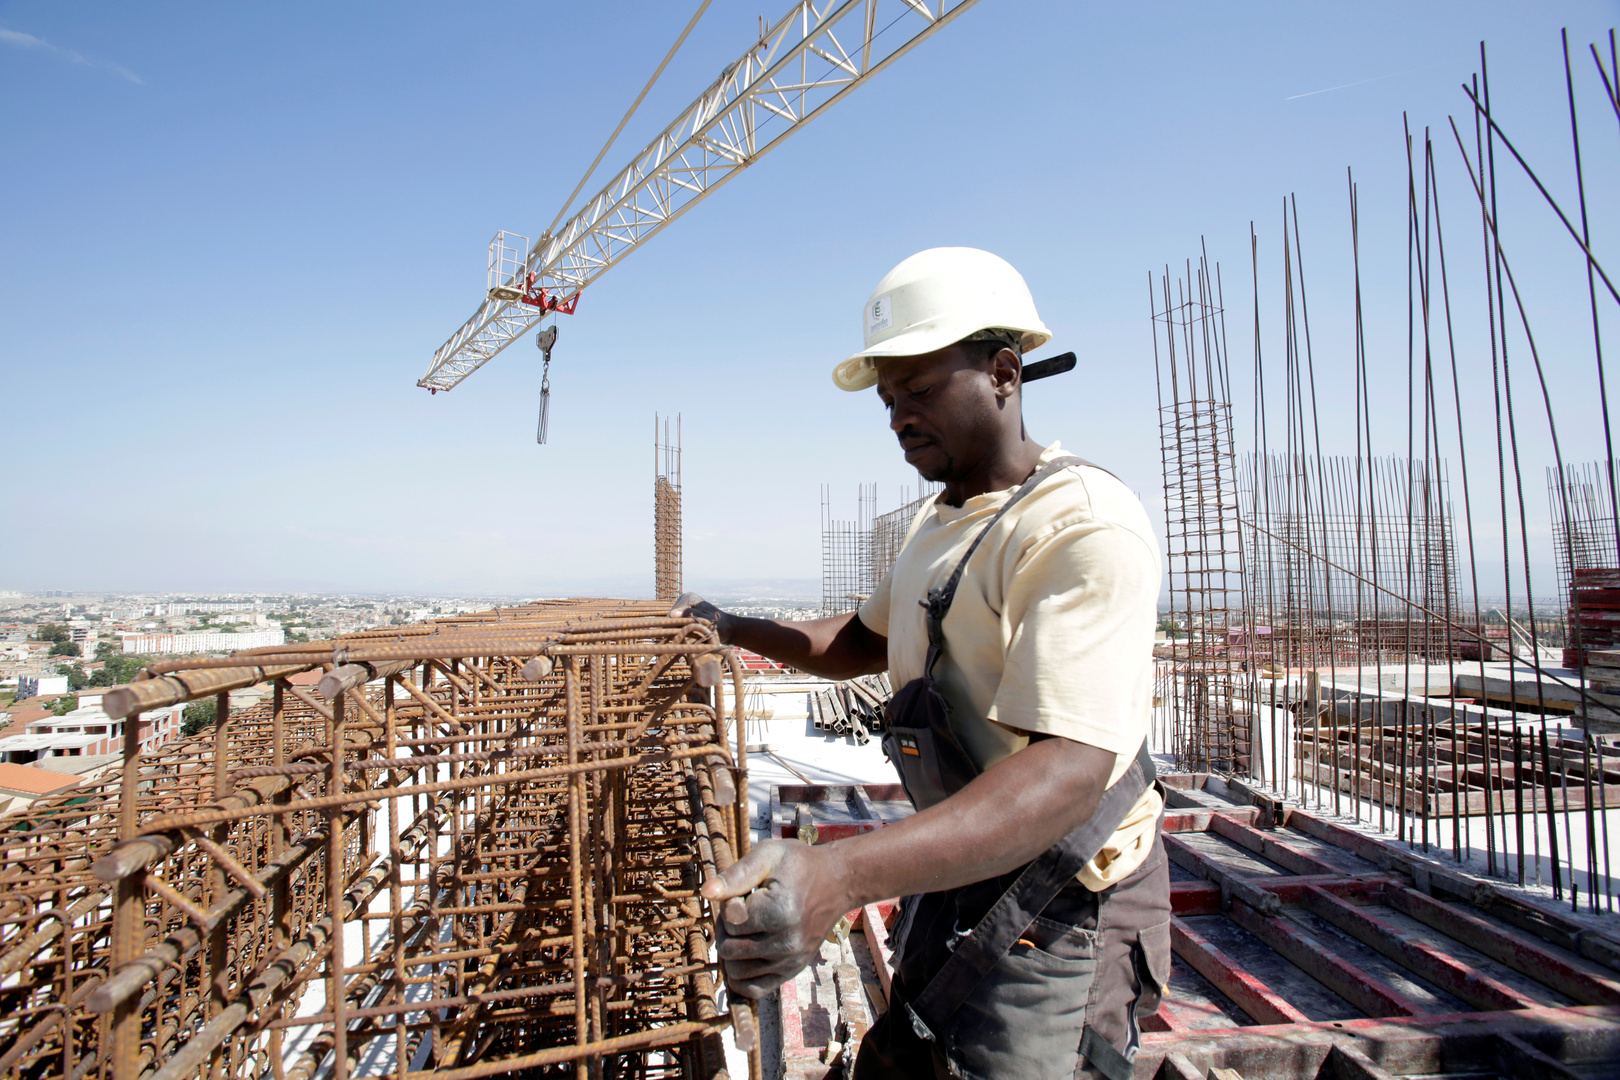 Proposed offering. Construction \ in Africa. Африка строительство техники. Building Africa. Construction Projects in Africa.